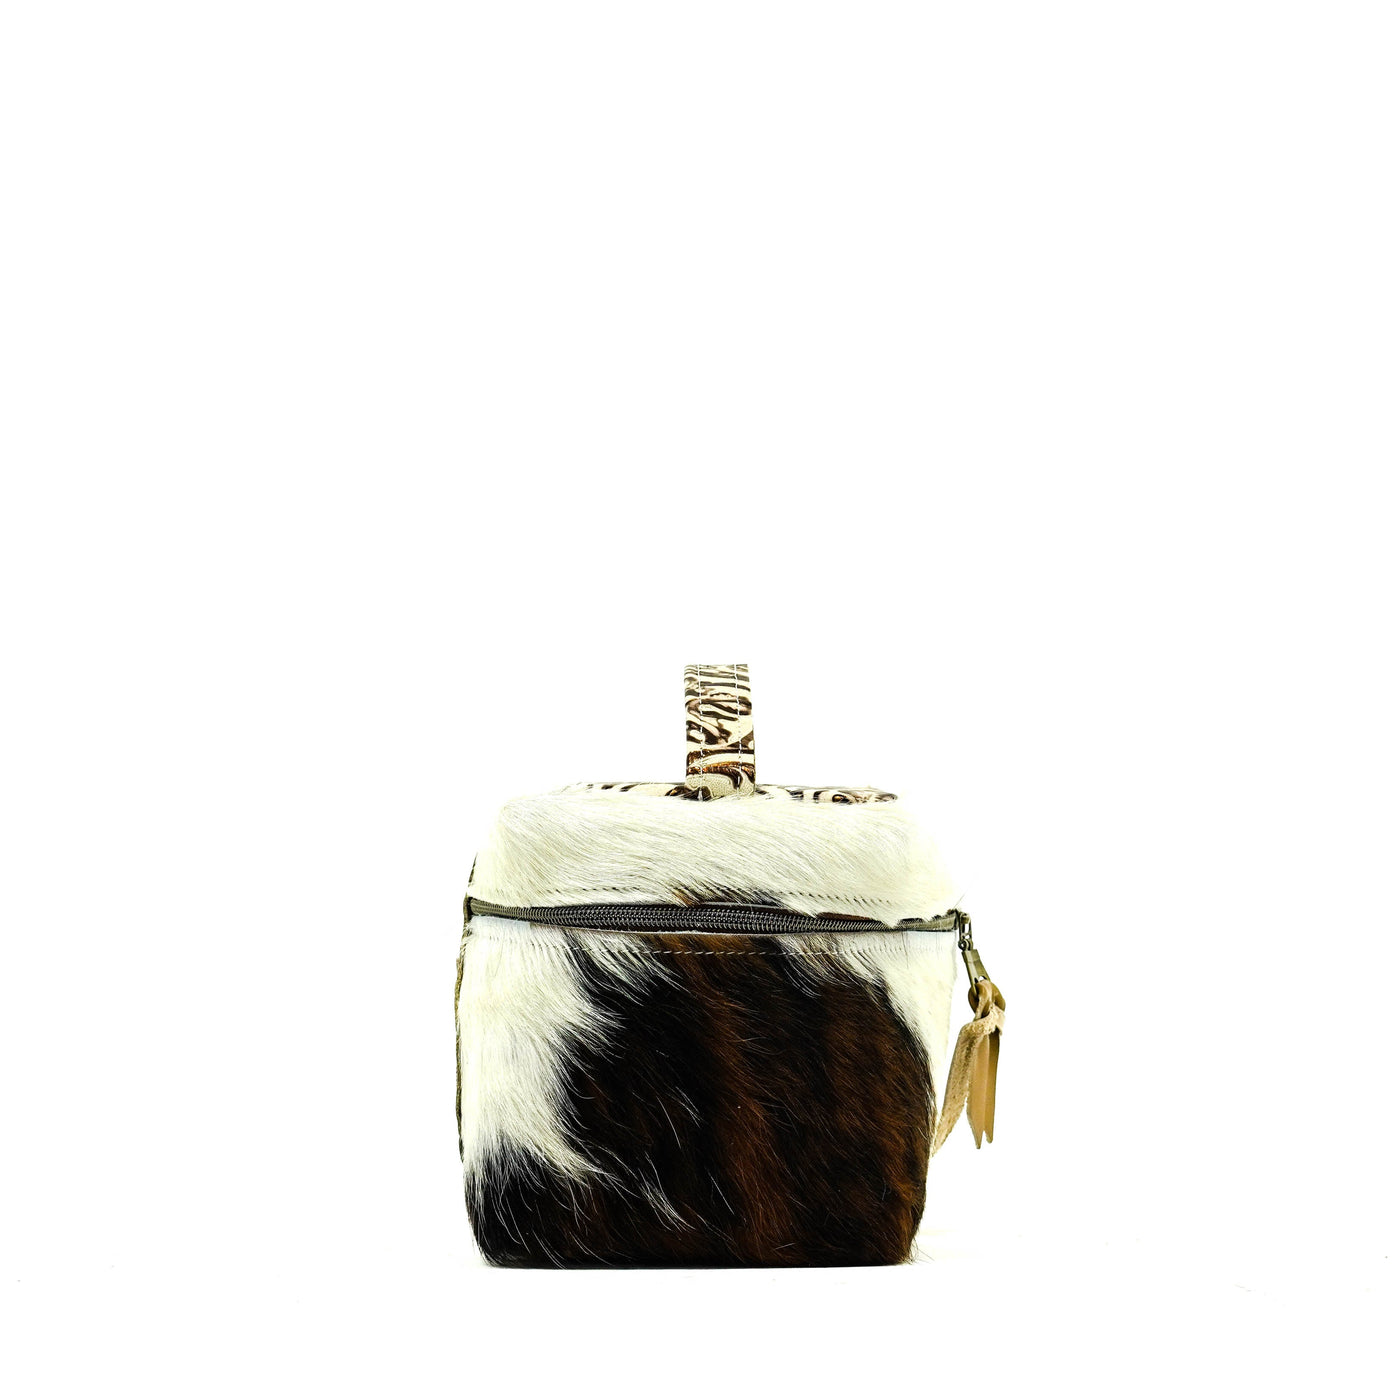 Caboose - Tricolor w/ Ivory Tool-Caboose-Western-Cowhide-Bags-Handmade-Products-Gifts-Dancing Cactus Designs